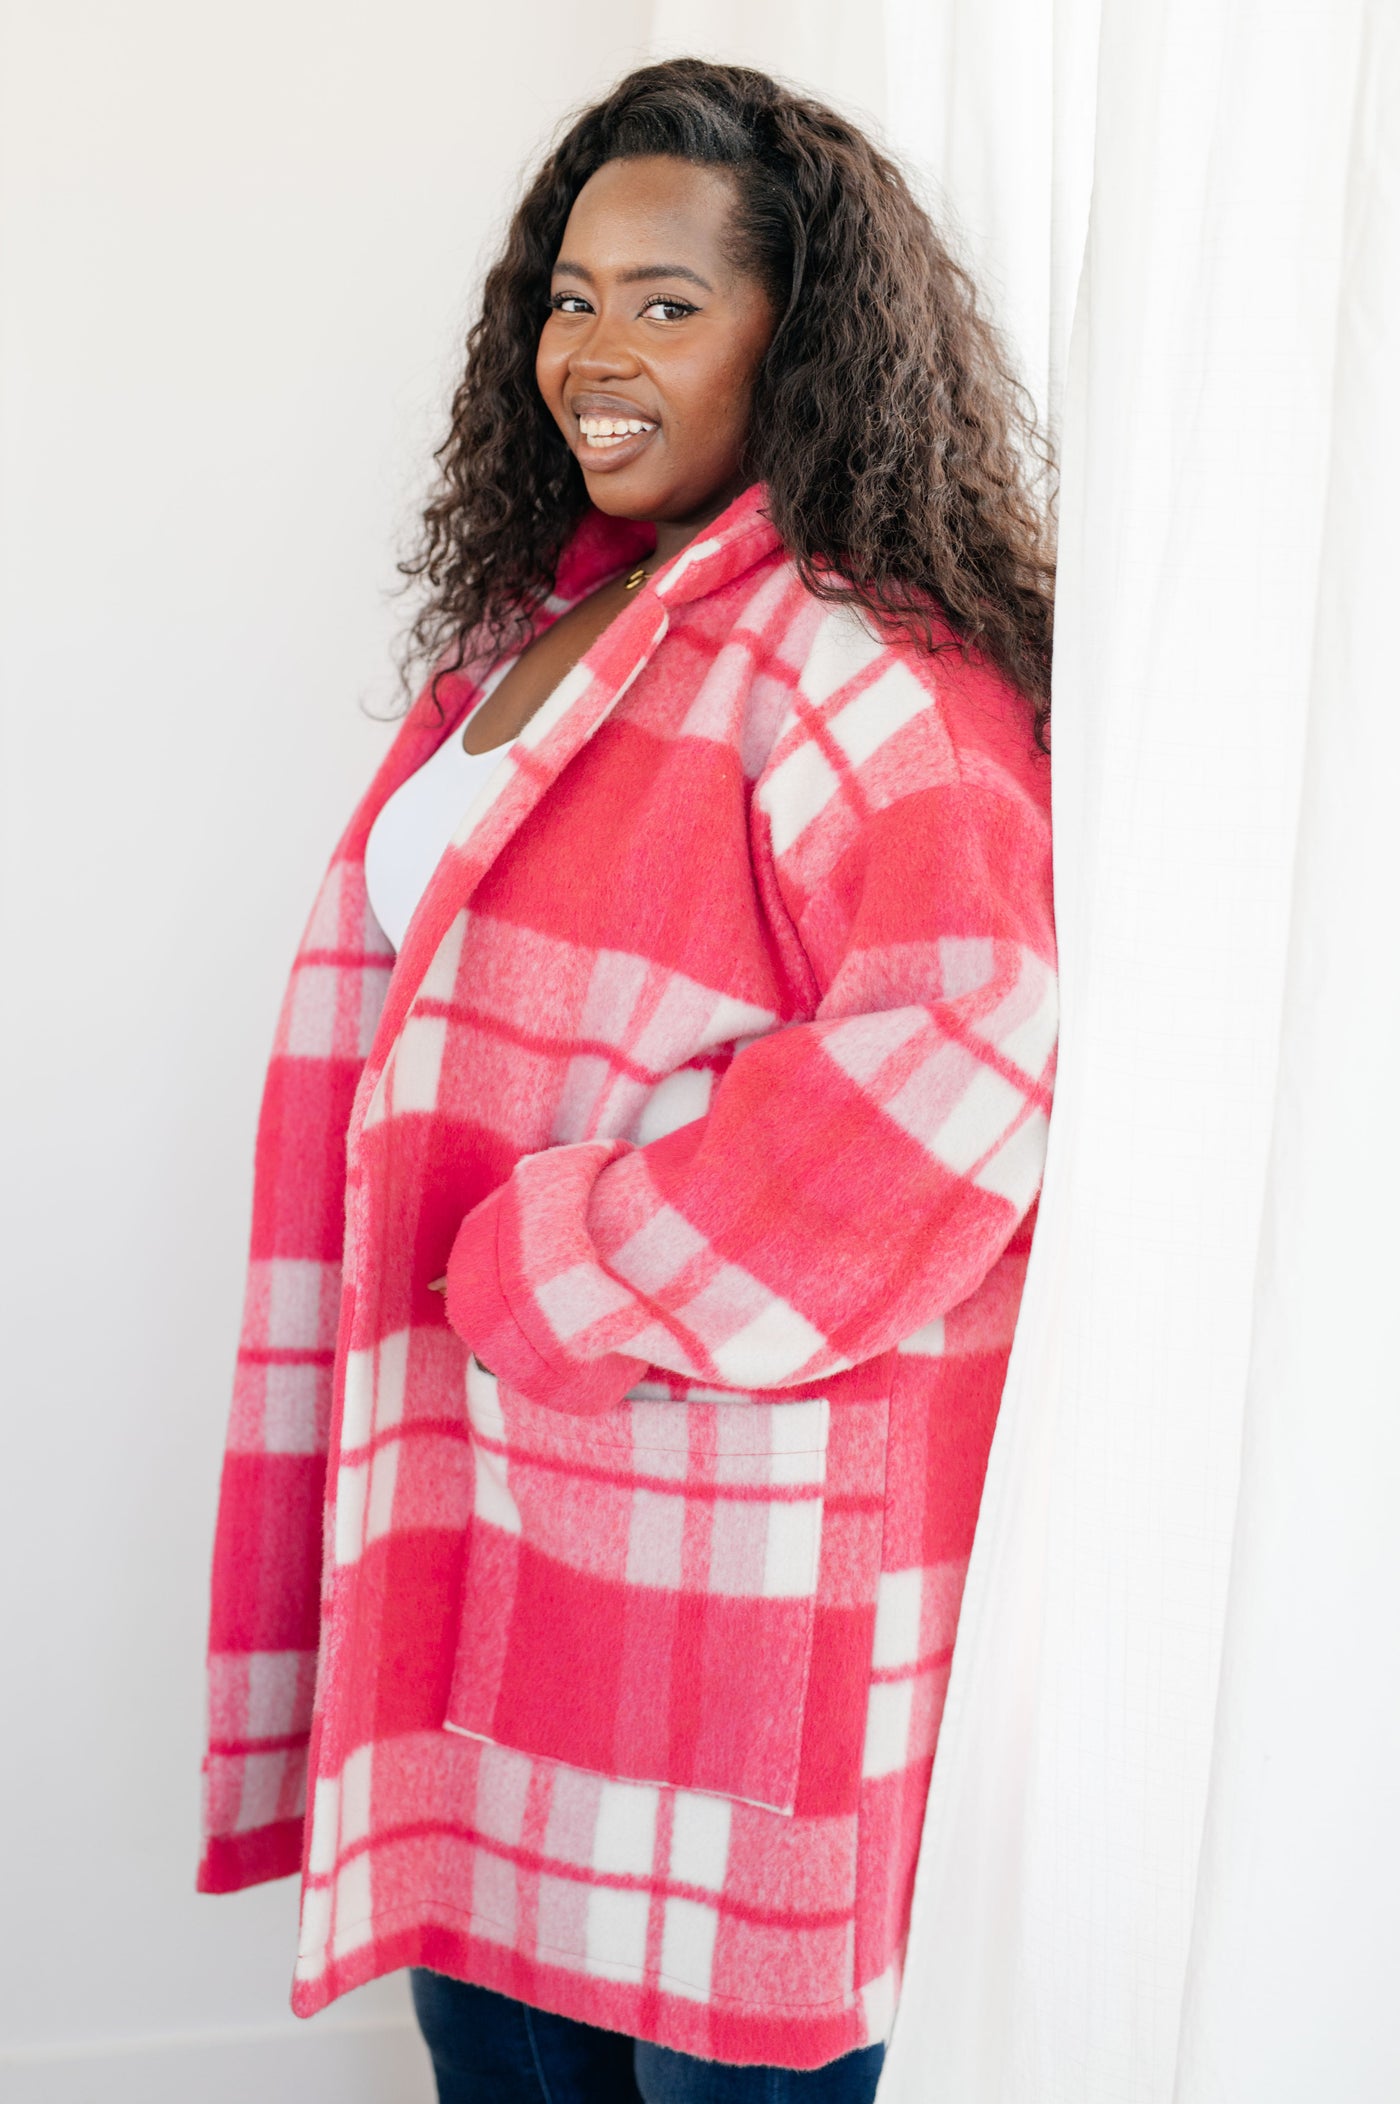 Stay warm all winter long with this stylish Passion in Plaid Coat. Made of warm brushed fabric and mid weight for ultimate comfort, this coat features a notched lapel and plaid print, plus pockets for storage